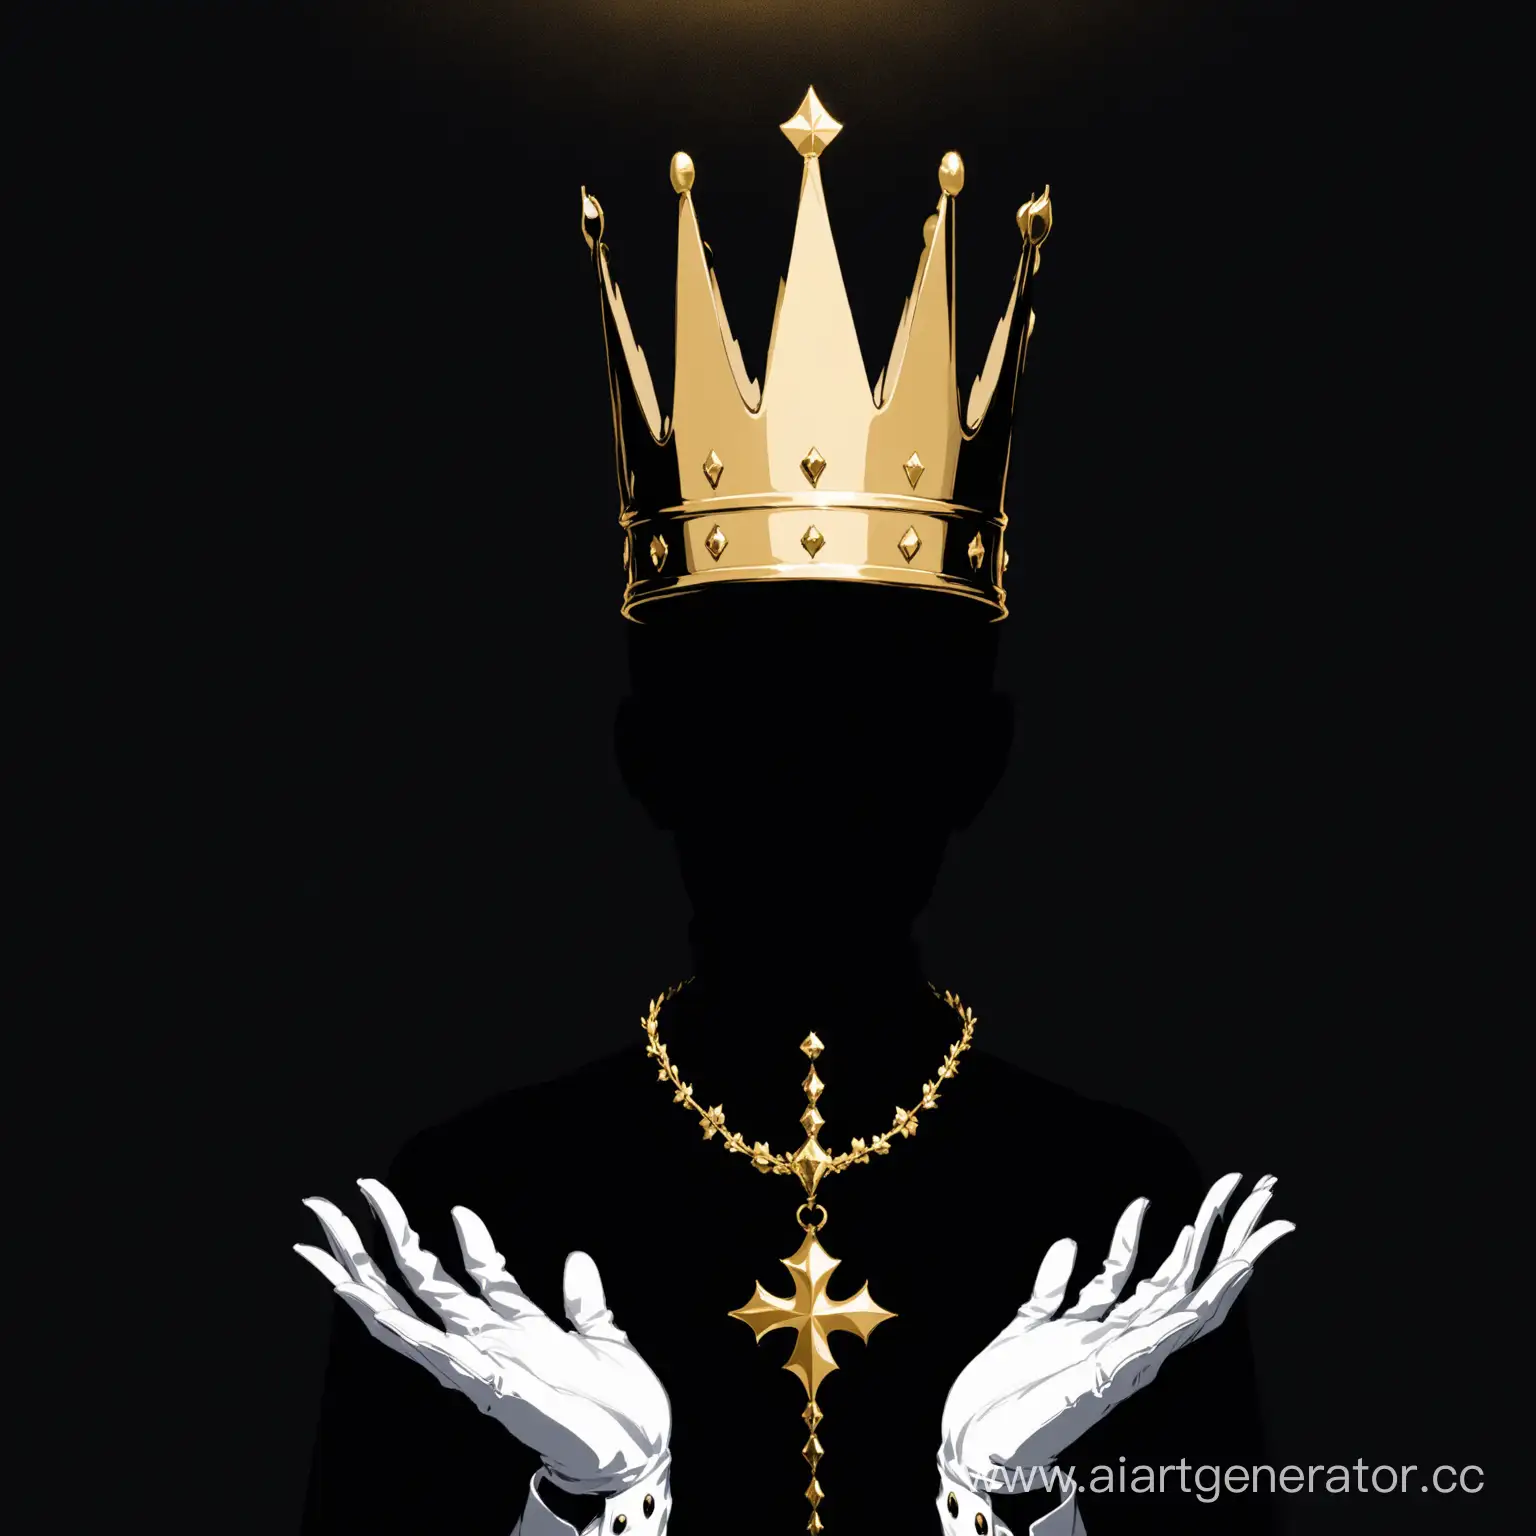 Mysterious-Figure-Wearing-Golden-Crown-and-White-Gloves-in-Shadow